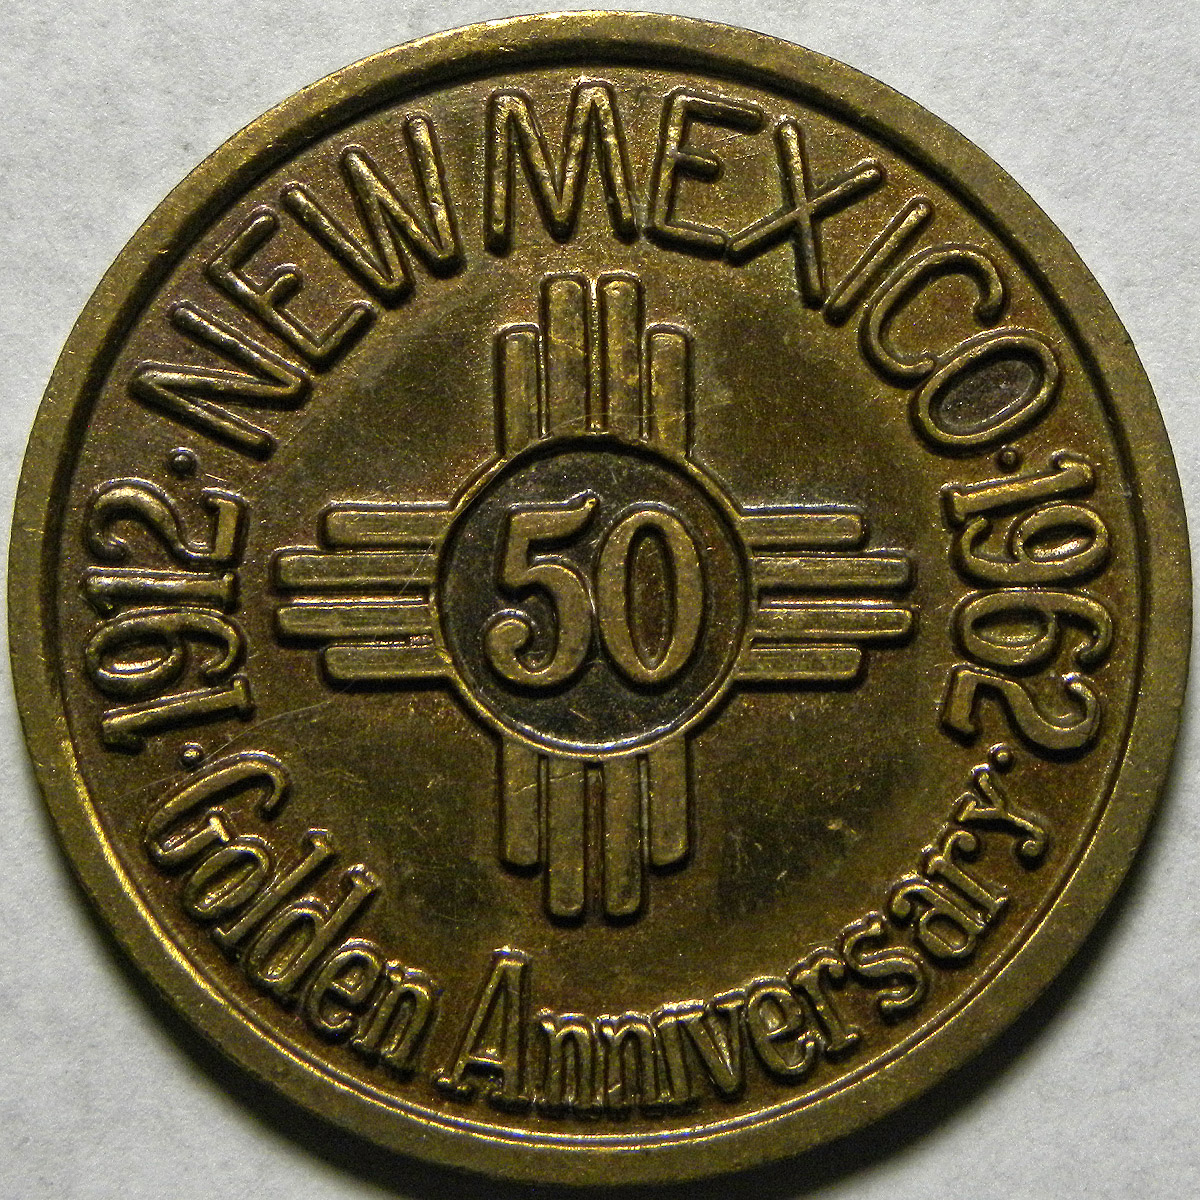 New Mexico 50th anniversary of statehood (1912-1962) medal (obverse)